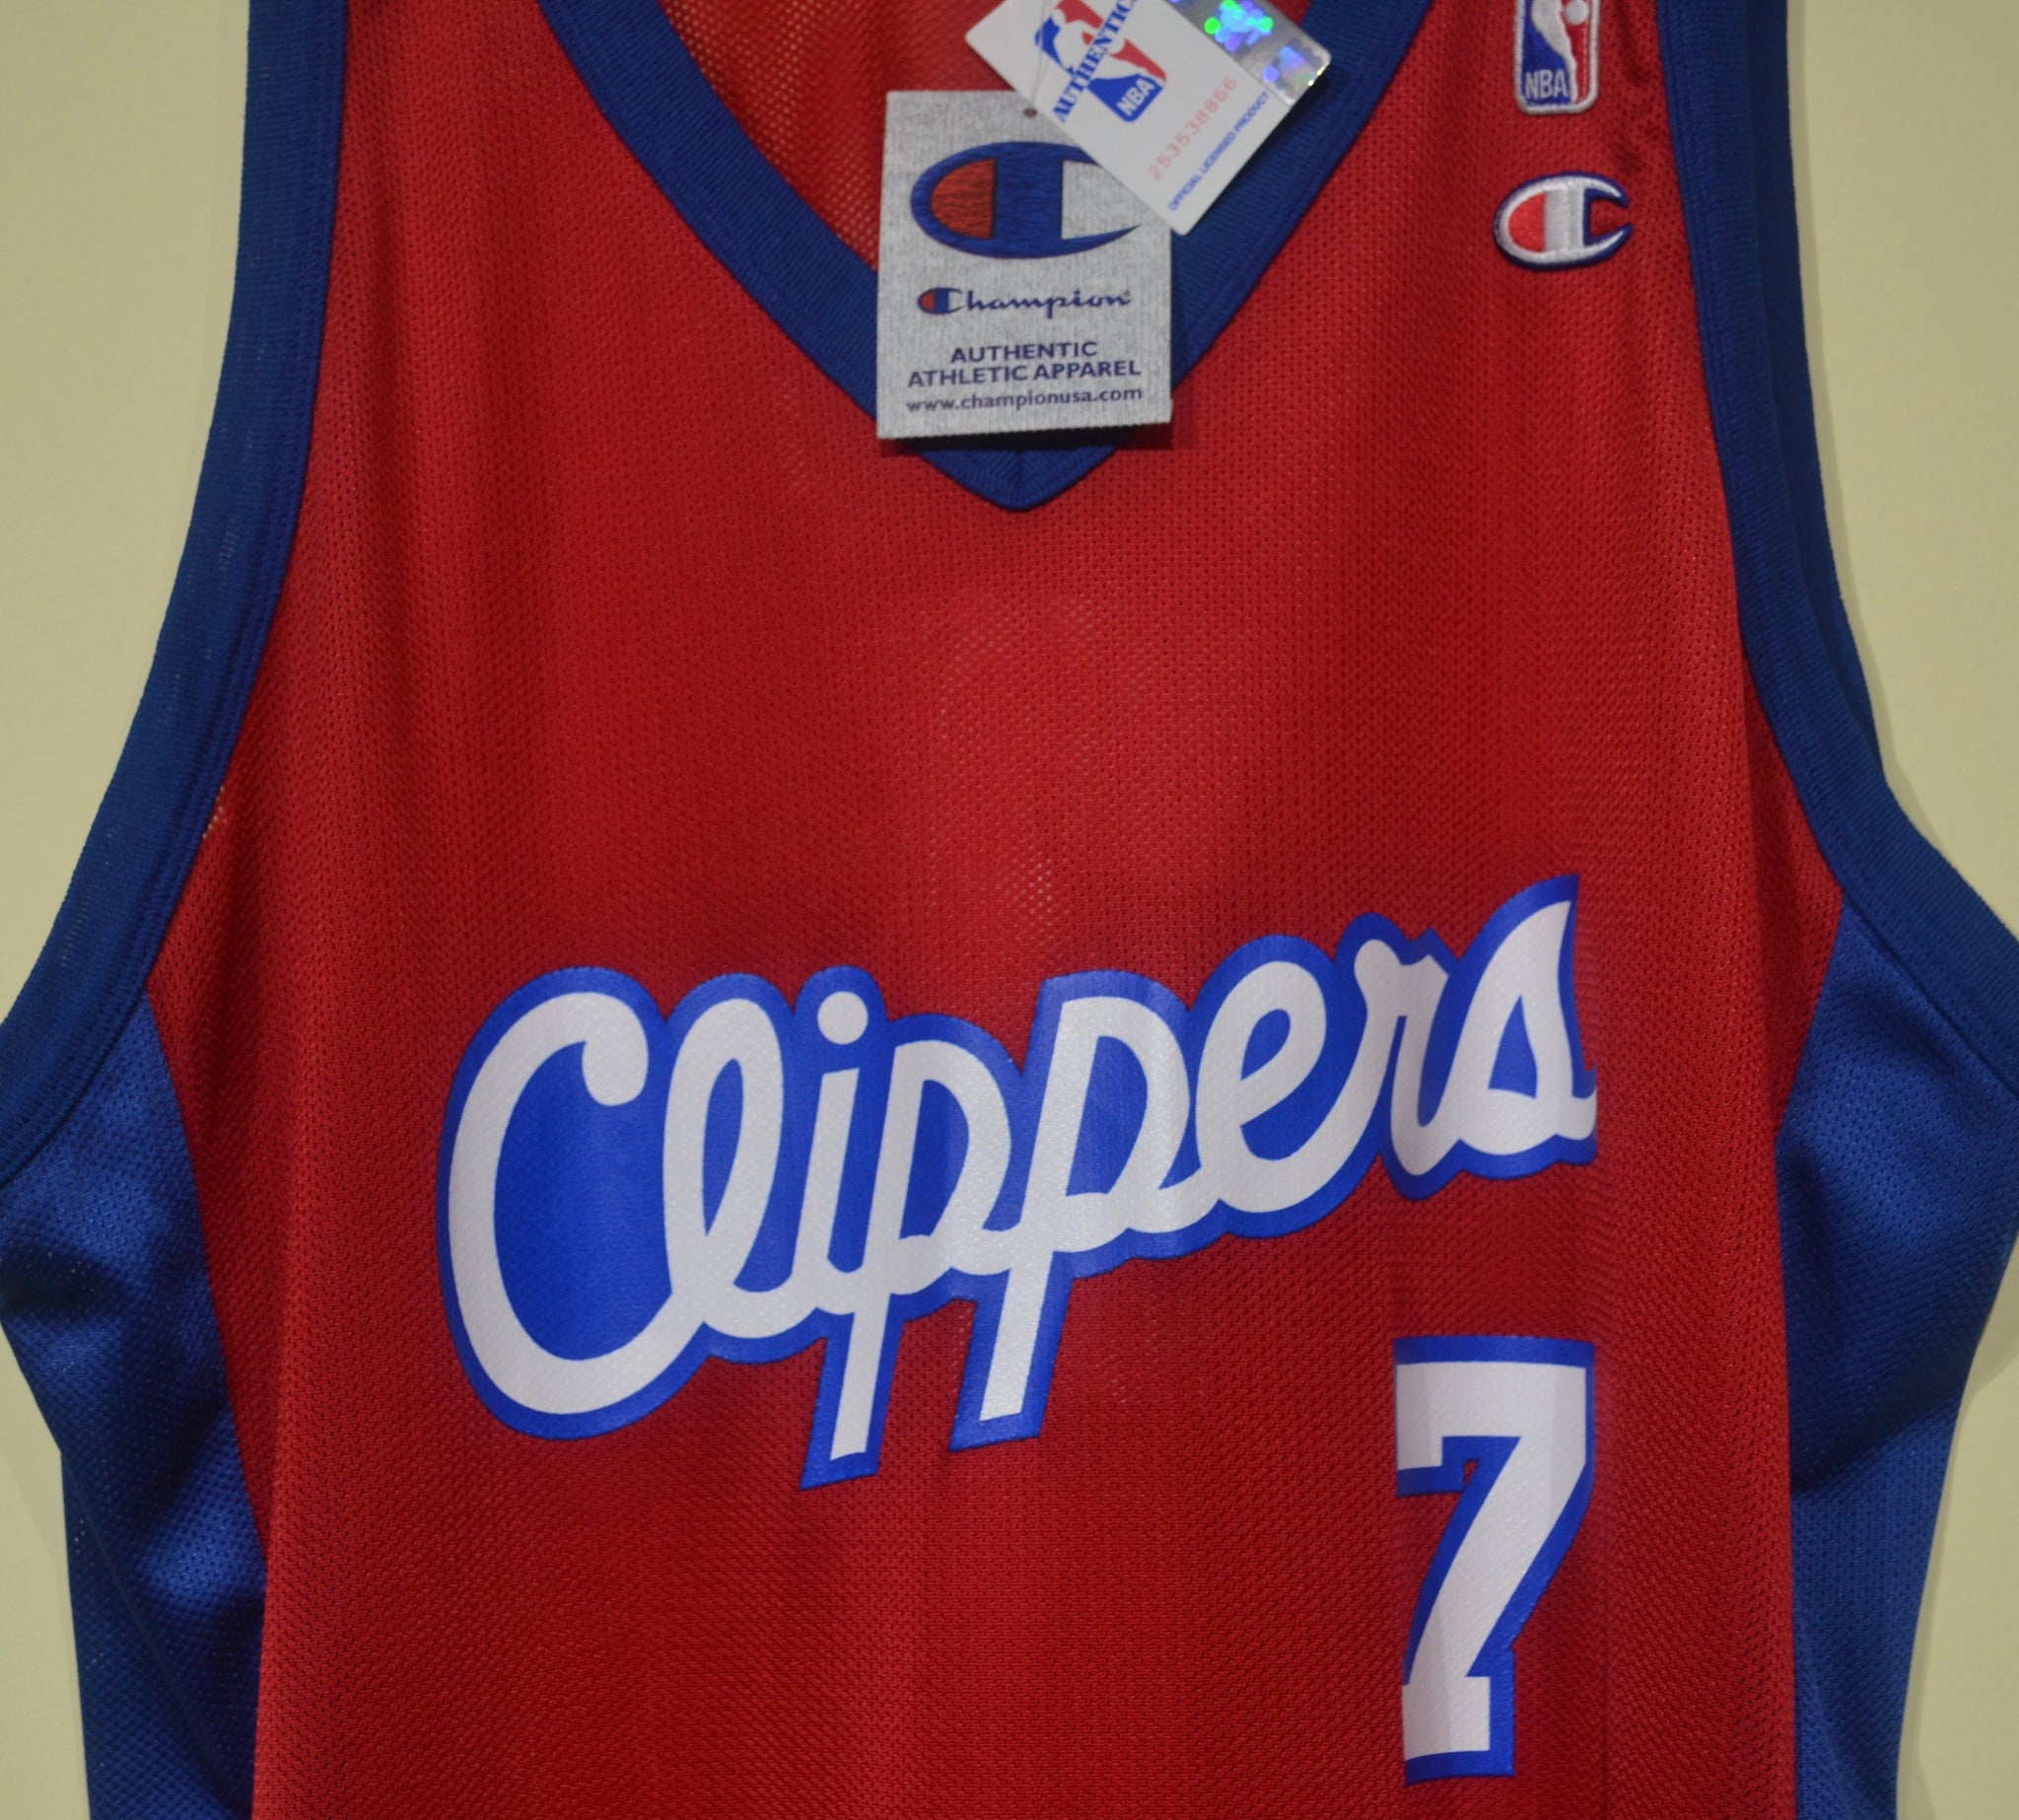 Vintage Lamar Odom 7 LA Clippers Basketball Jersey NBA Authentic